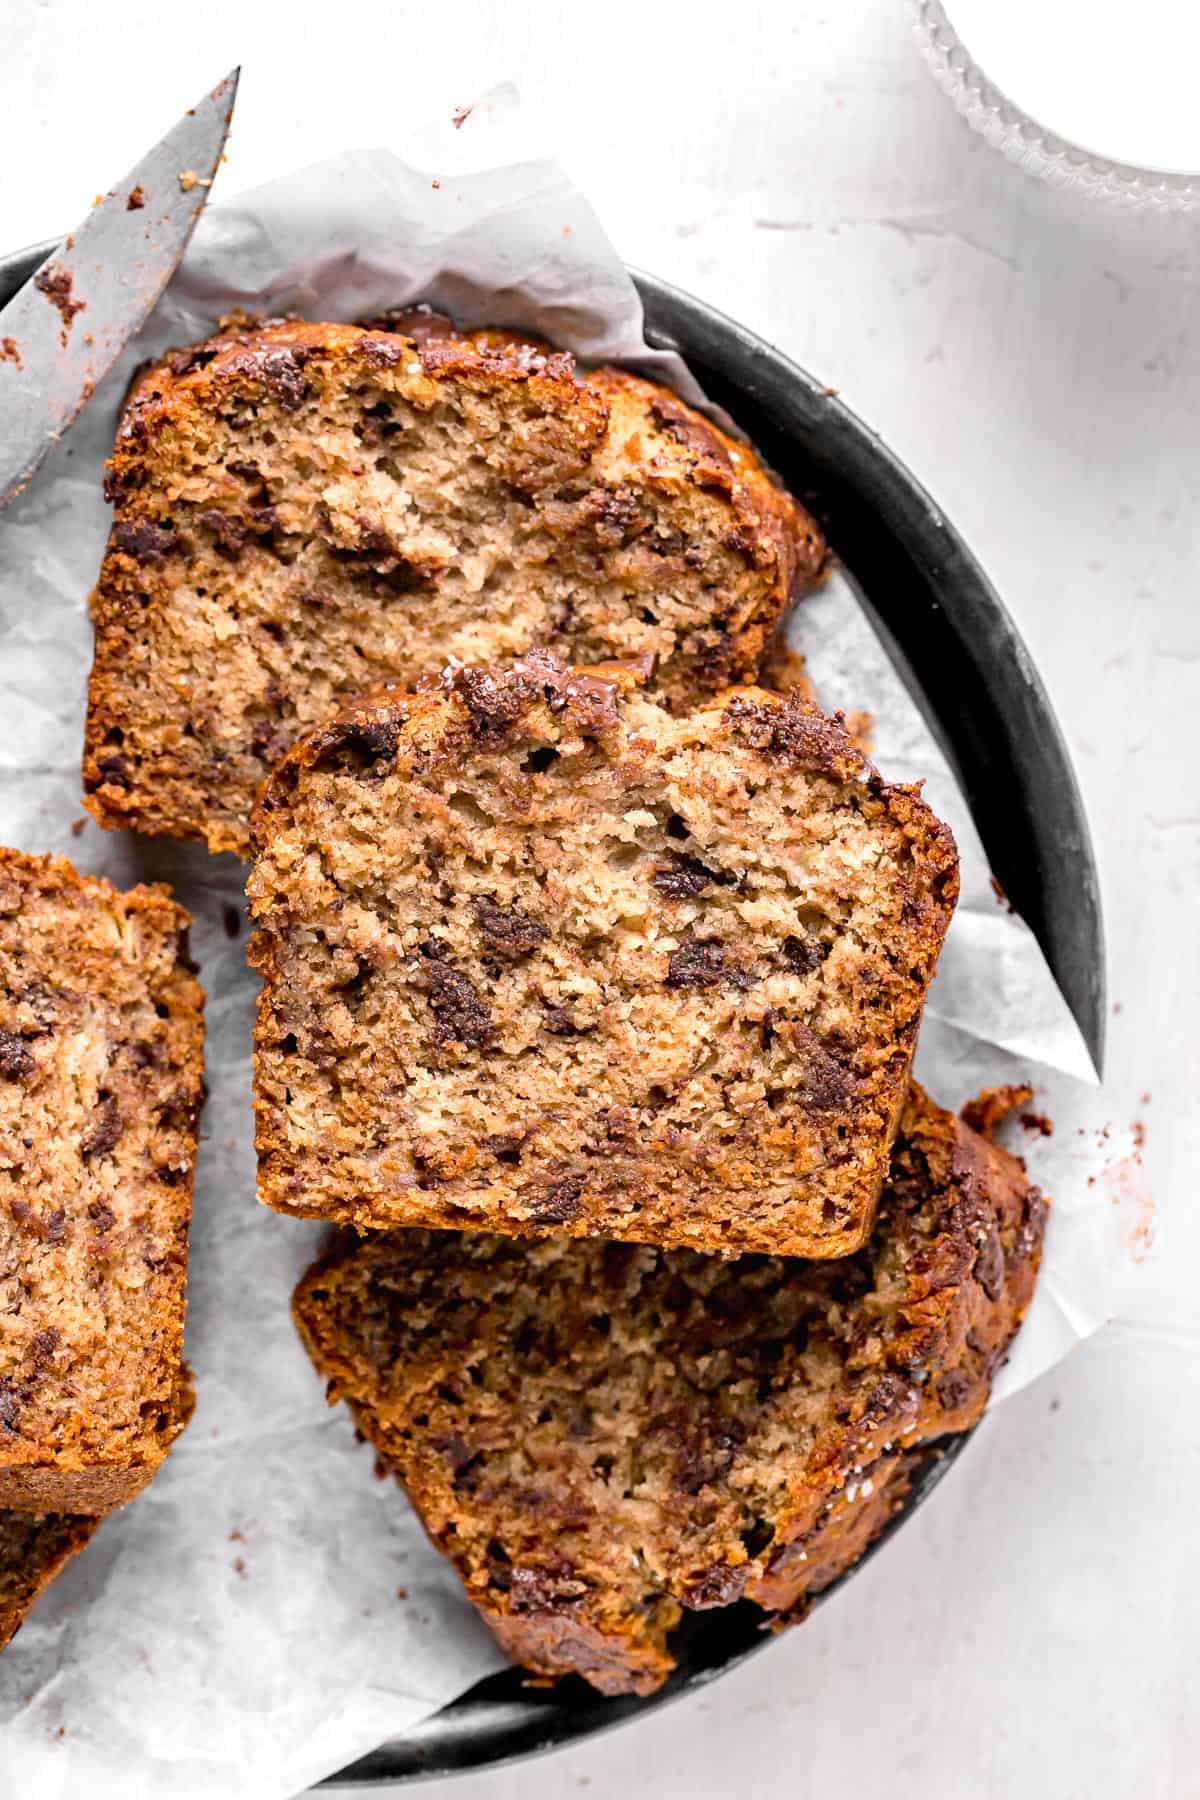 slices of banana bread made with olive oil and honey piled on plate.